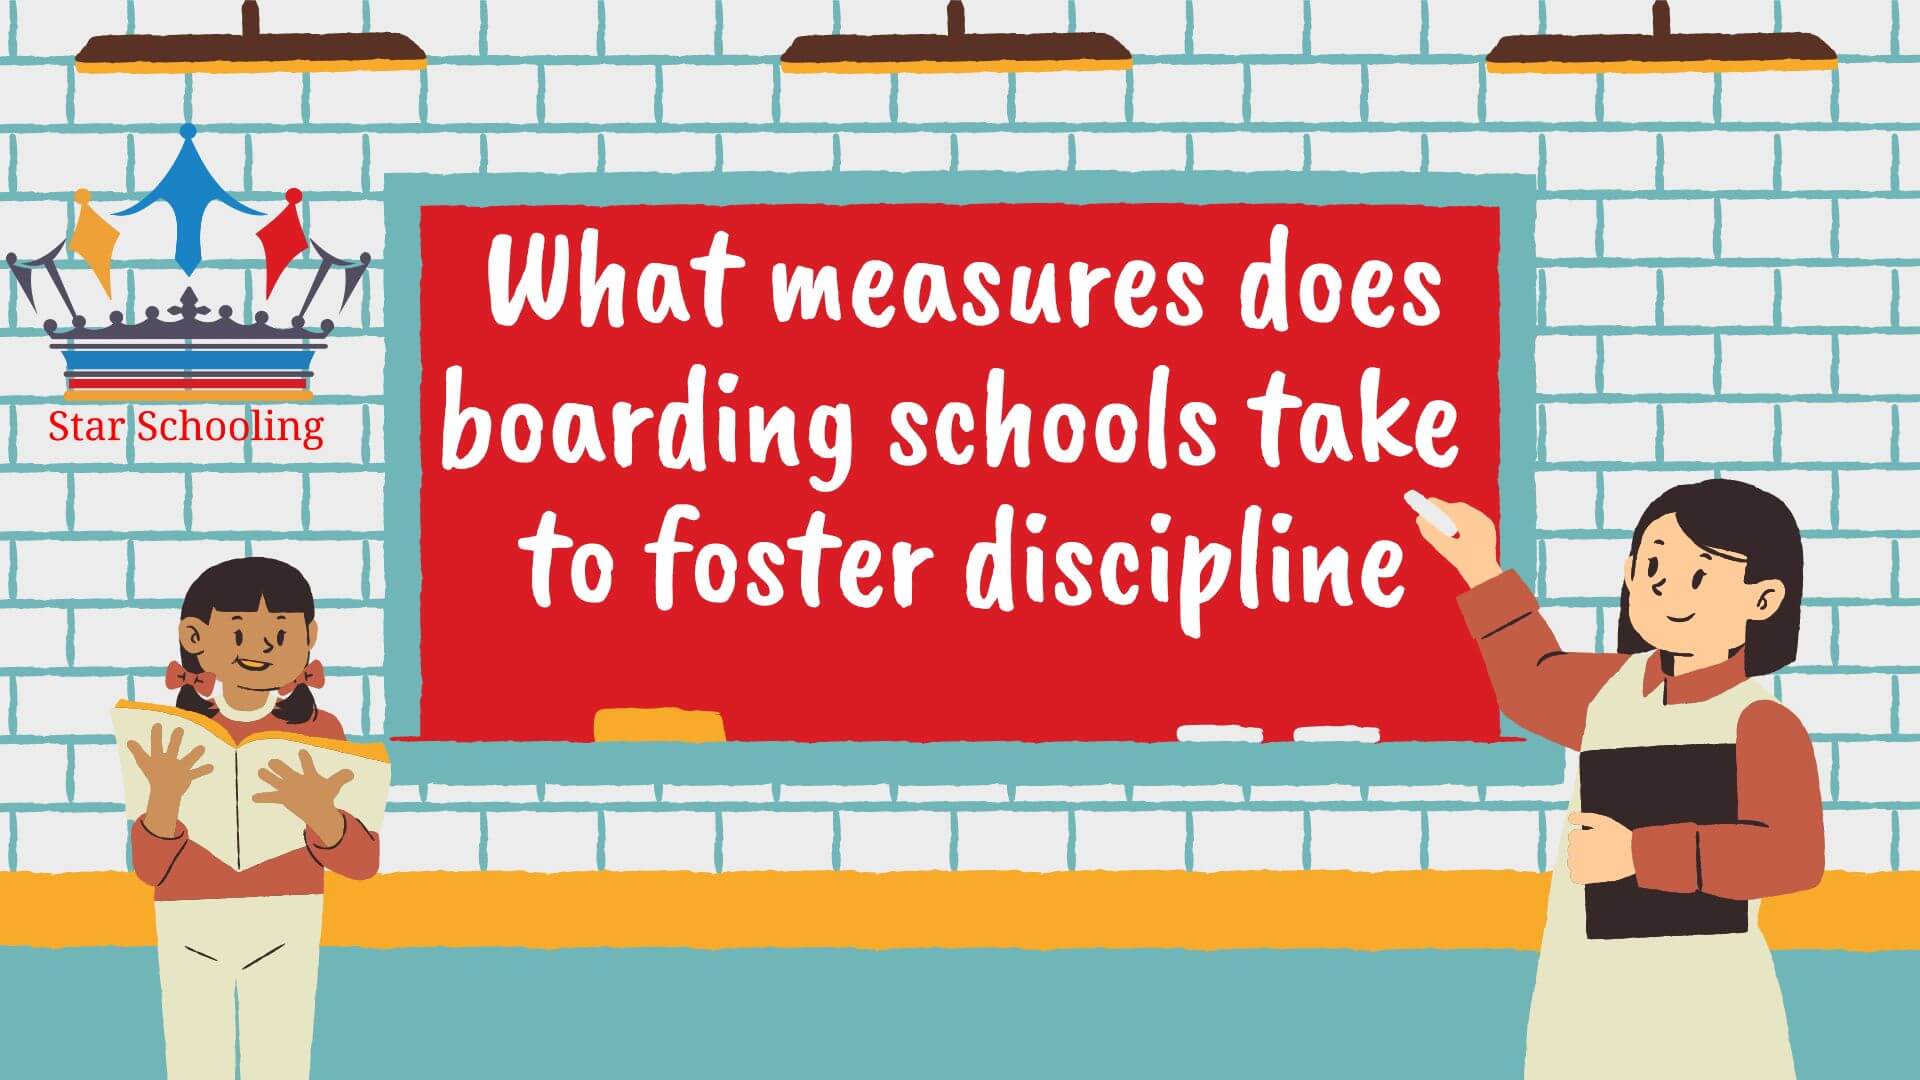 What measures does boarding schools take to foster discipline?